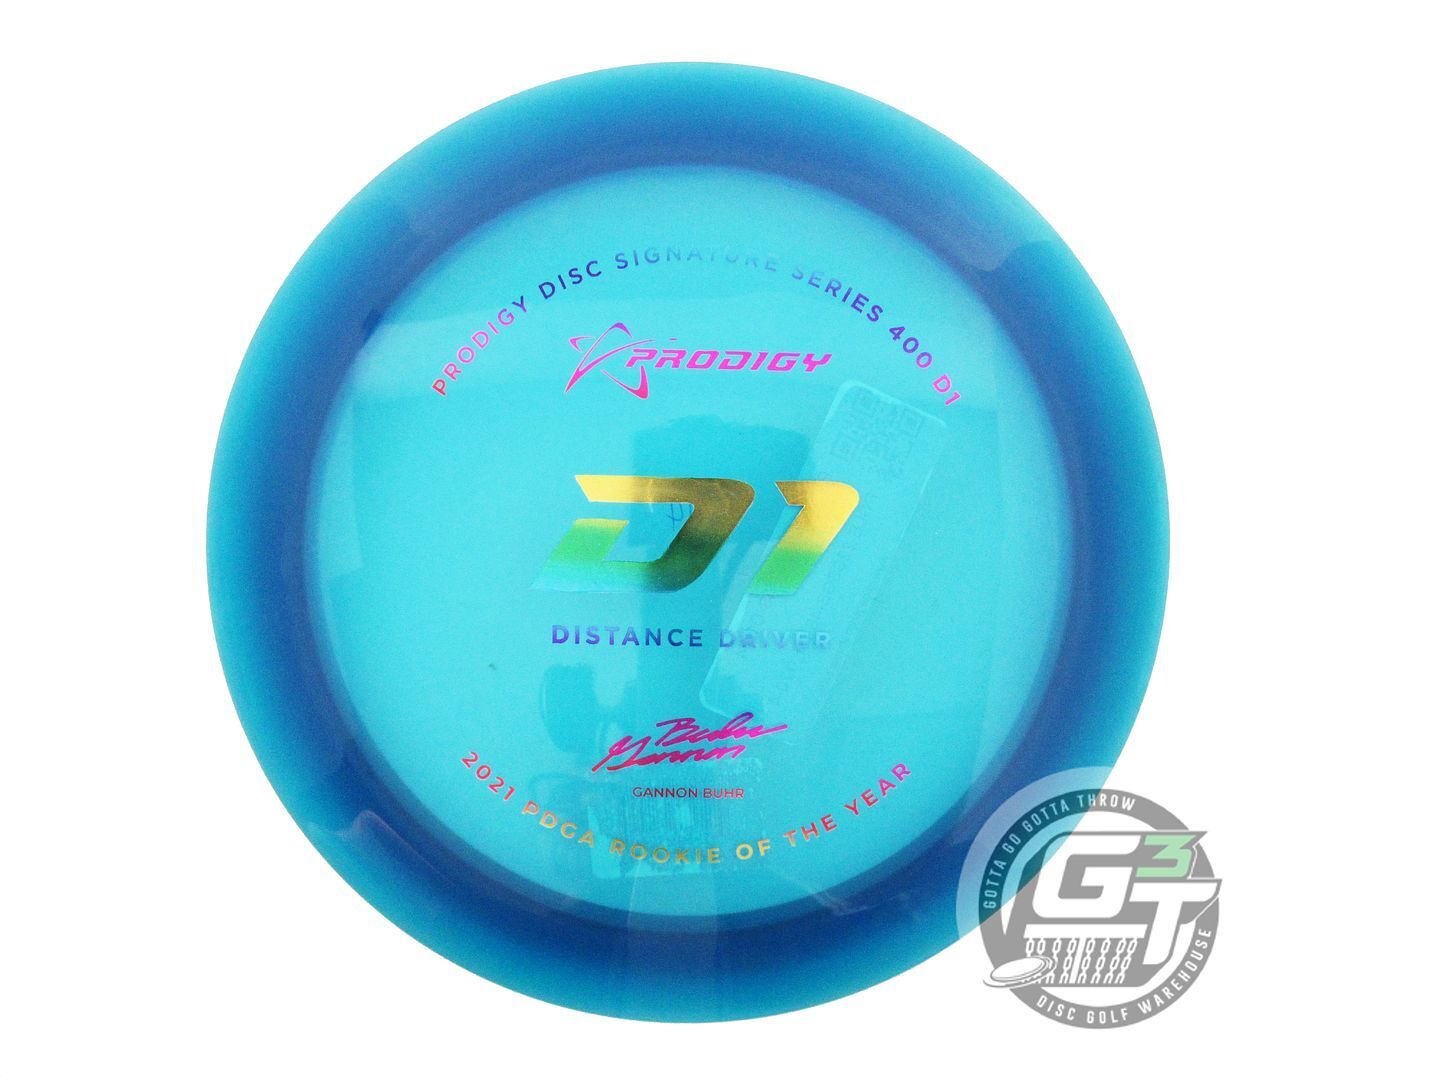 Prodigy Limited Edition 2022 Signature Series Gannon Buhr 500 Series D1 Distance Driver Golf Disc (Individually Listed)